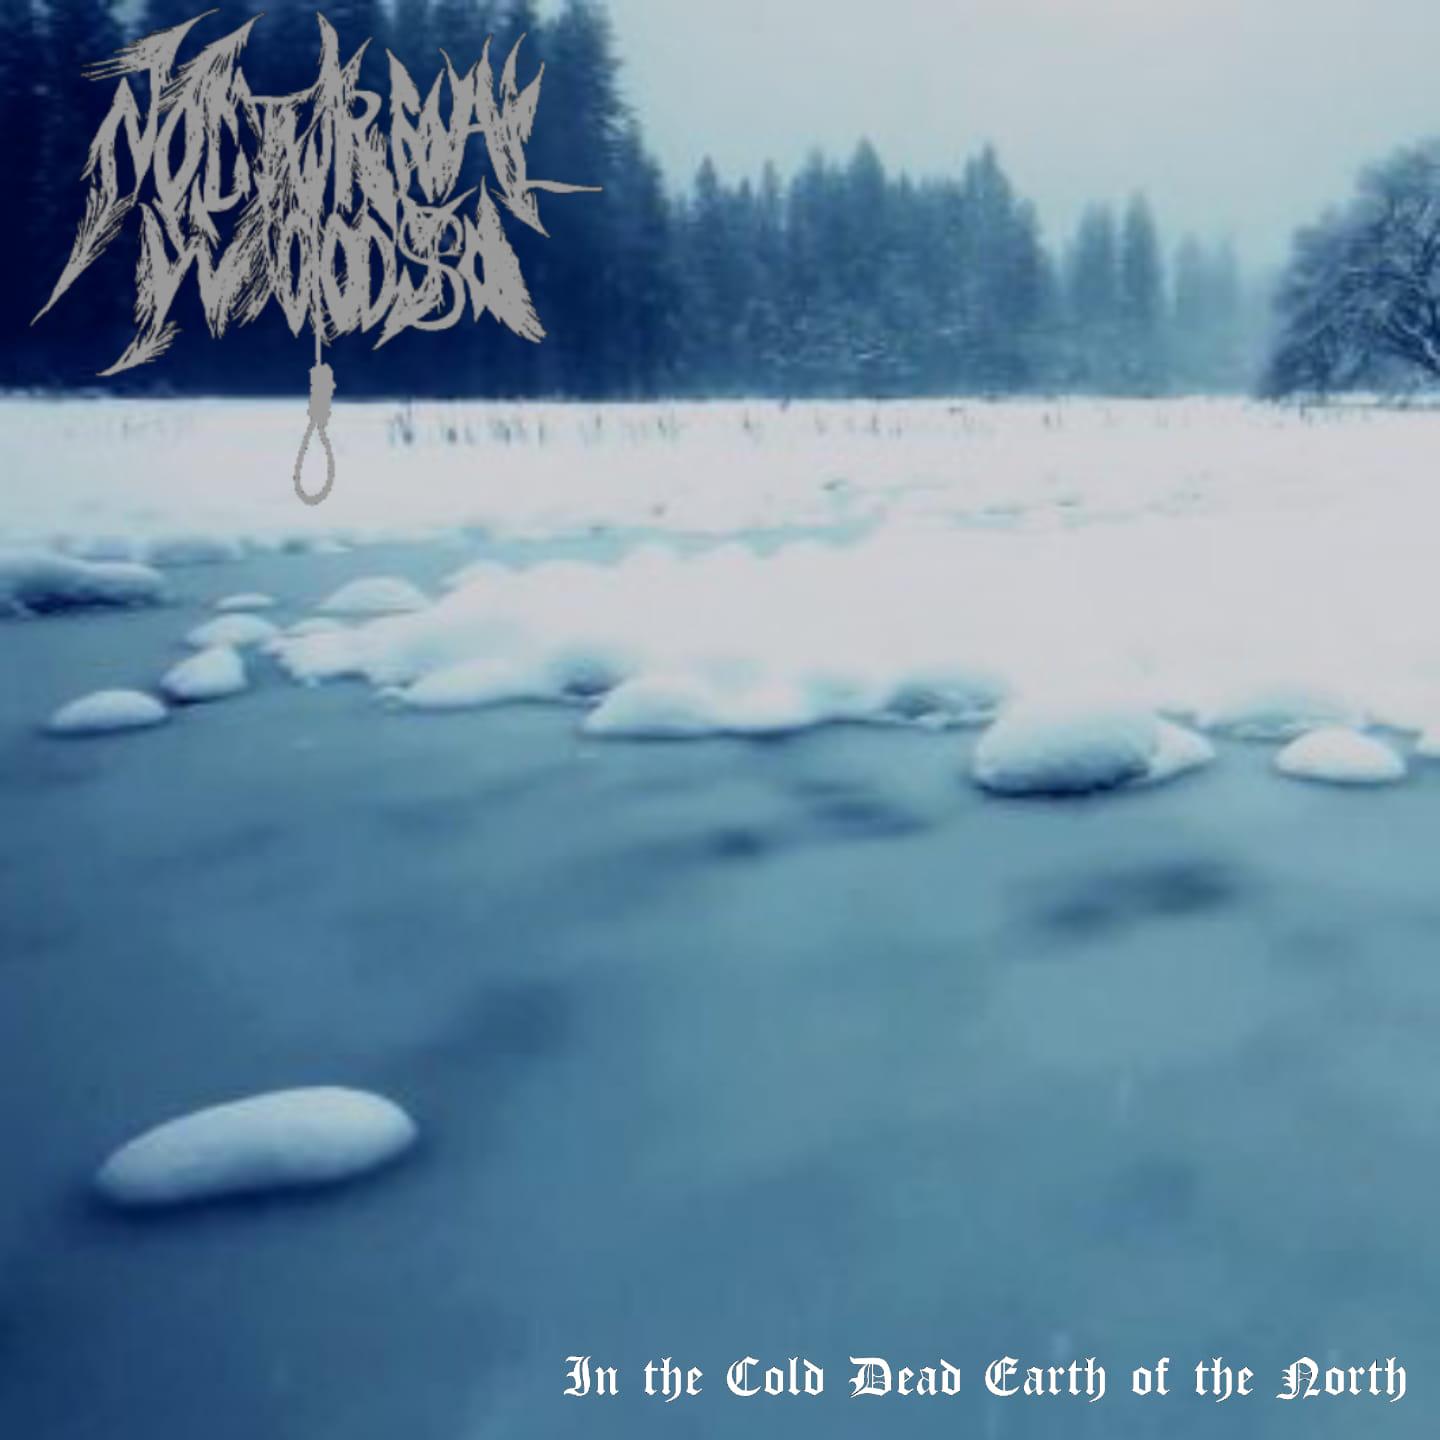 Dead cold. Cinderella "long Cold Winter". Neroth Nocturnal Woods Ep. Cold Earth – your Misery, my Triumph. Children of a Dead Earth.